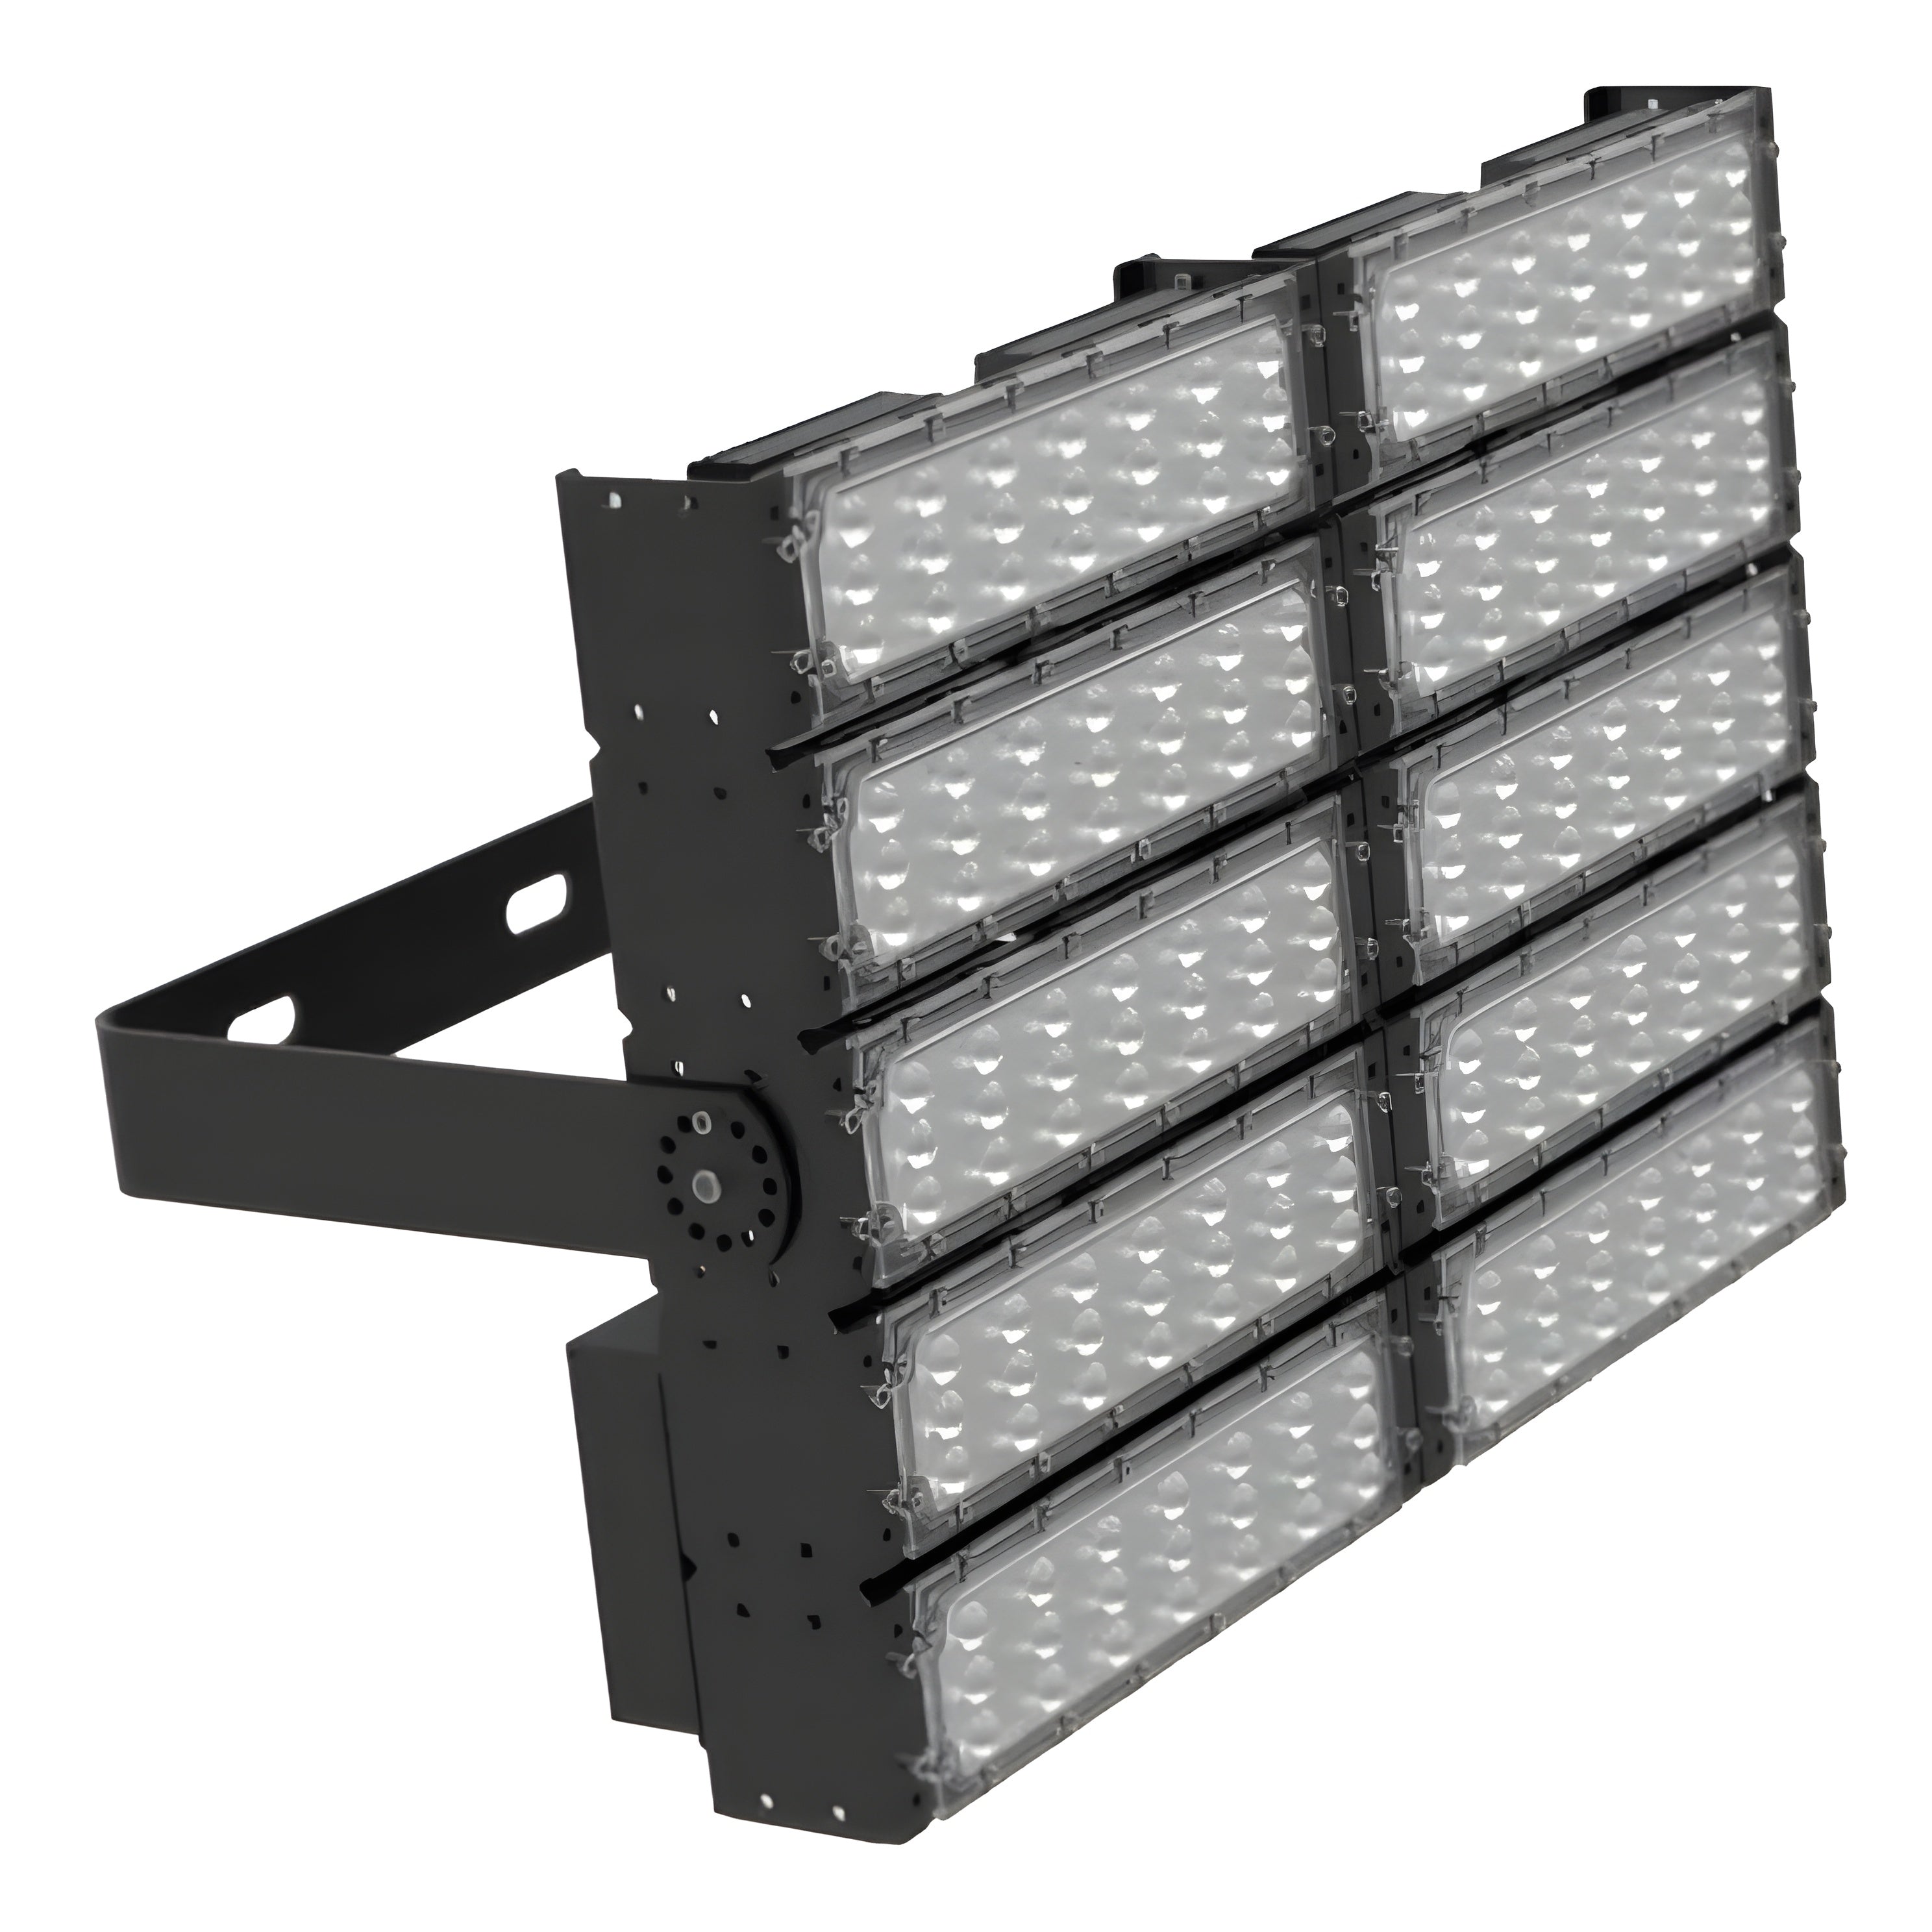 Choosing the right LED Floodlight for your needs